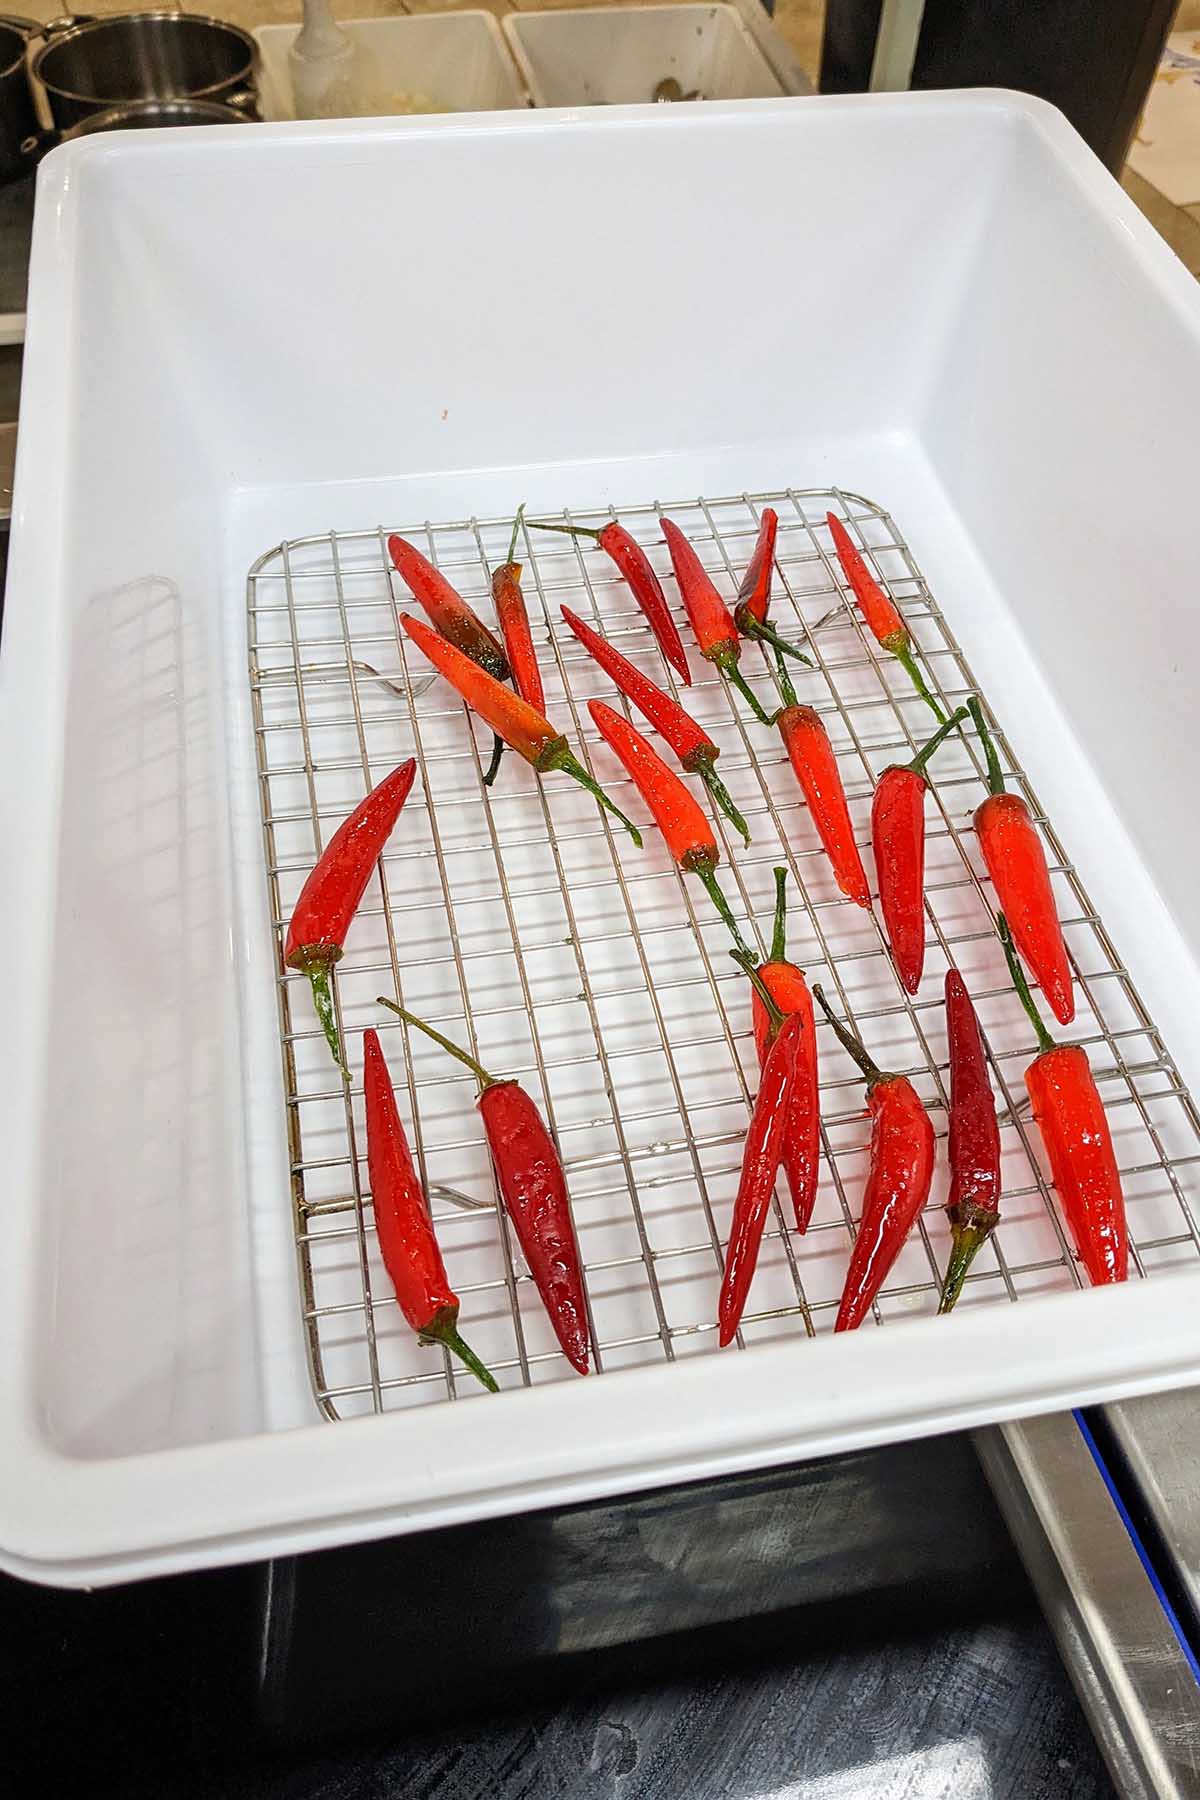 candied peppers laying on a drying rack.